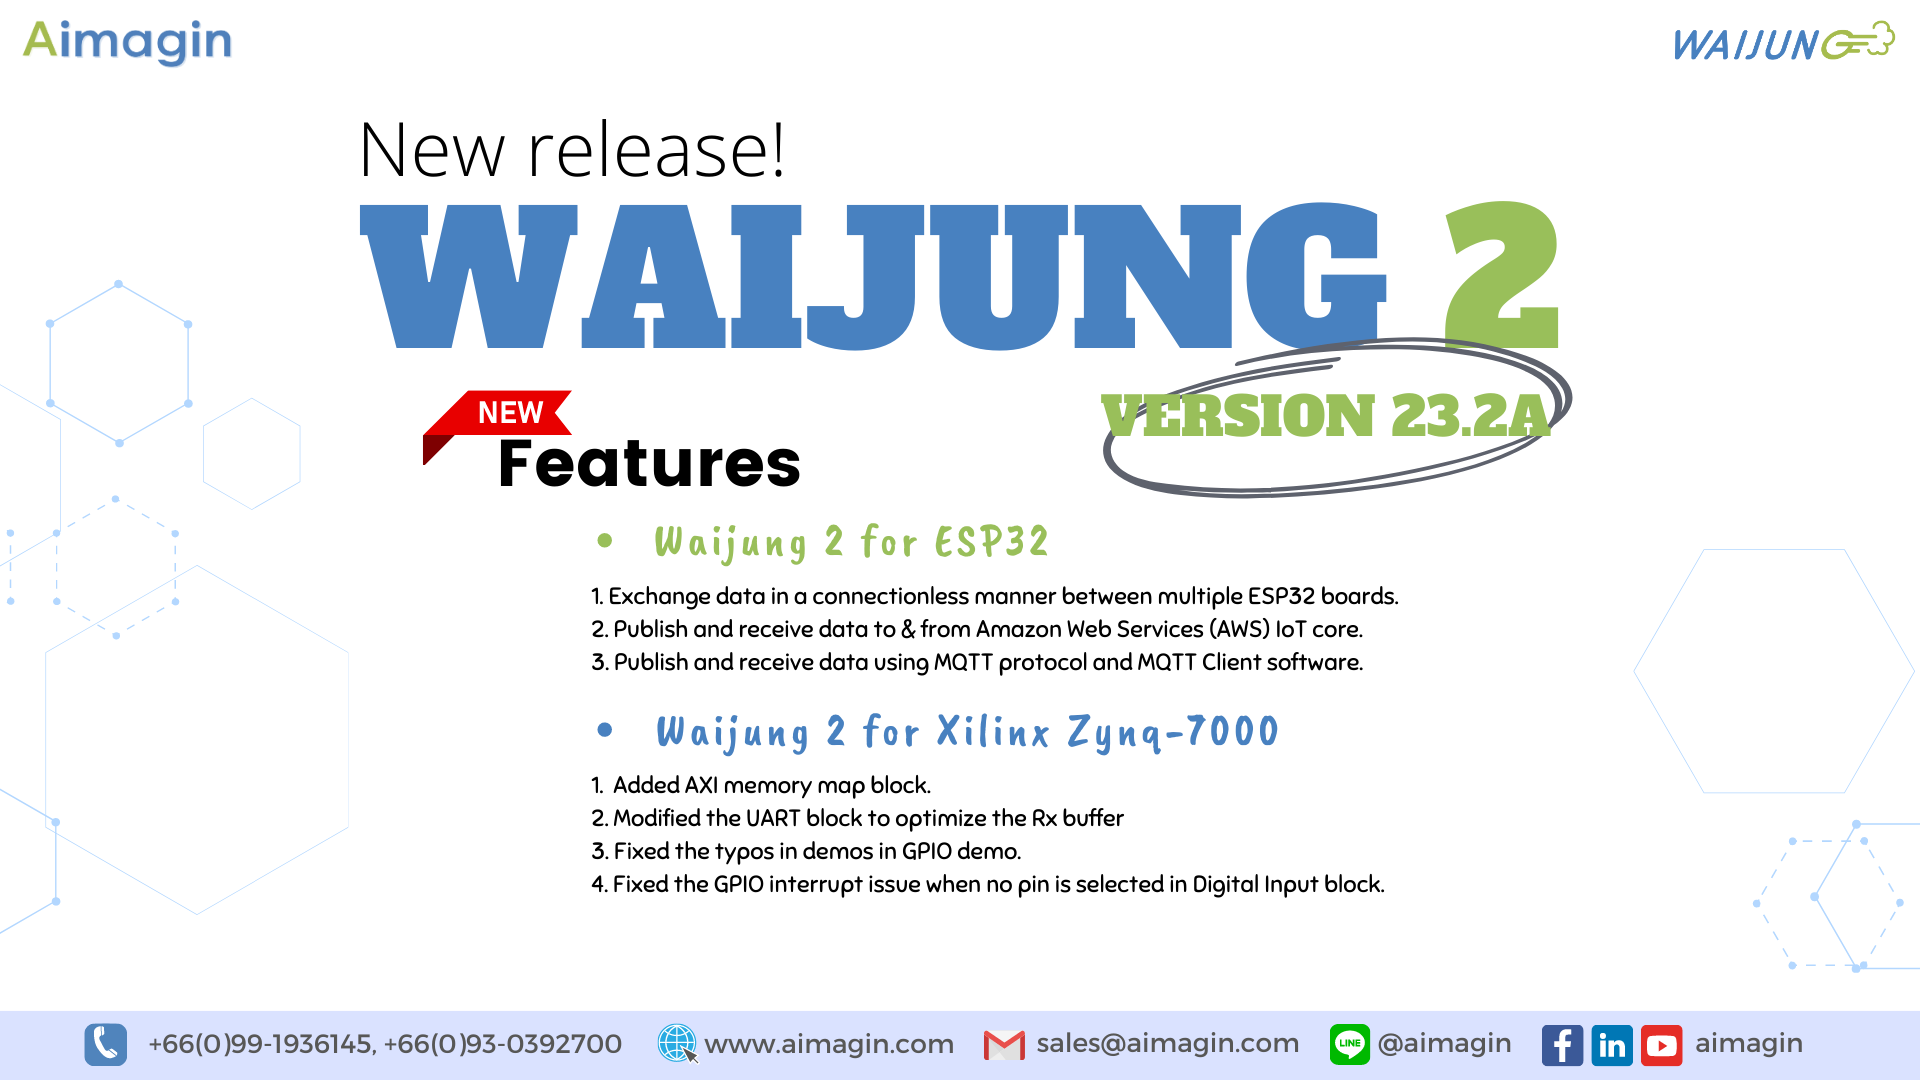 New Release!! Waijung 2 version 23.2a